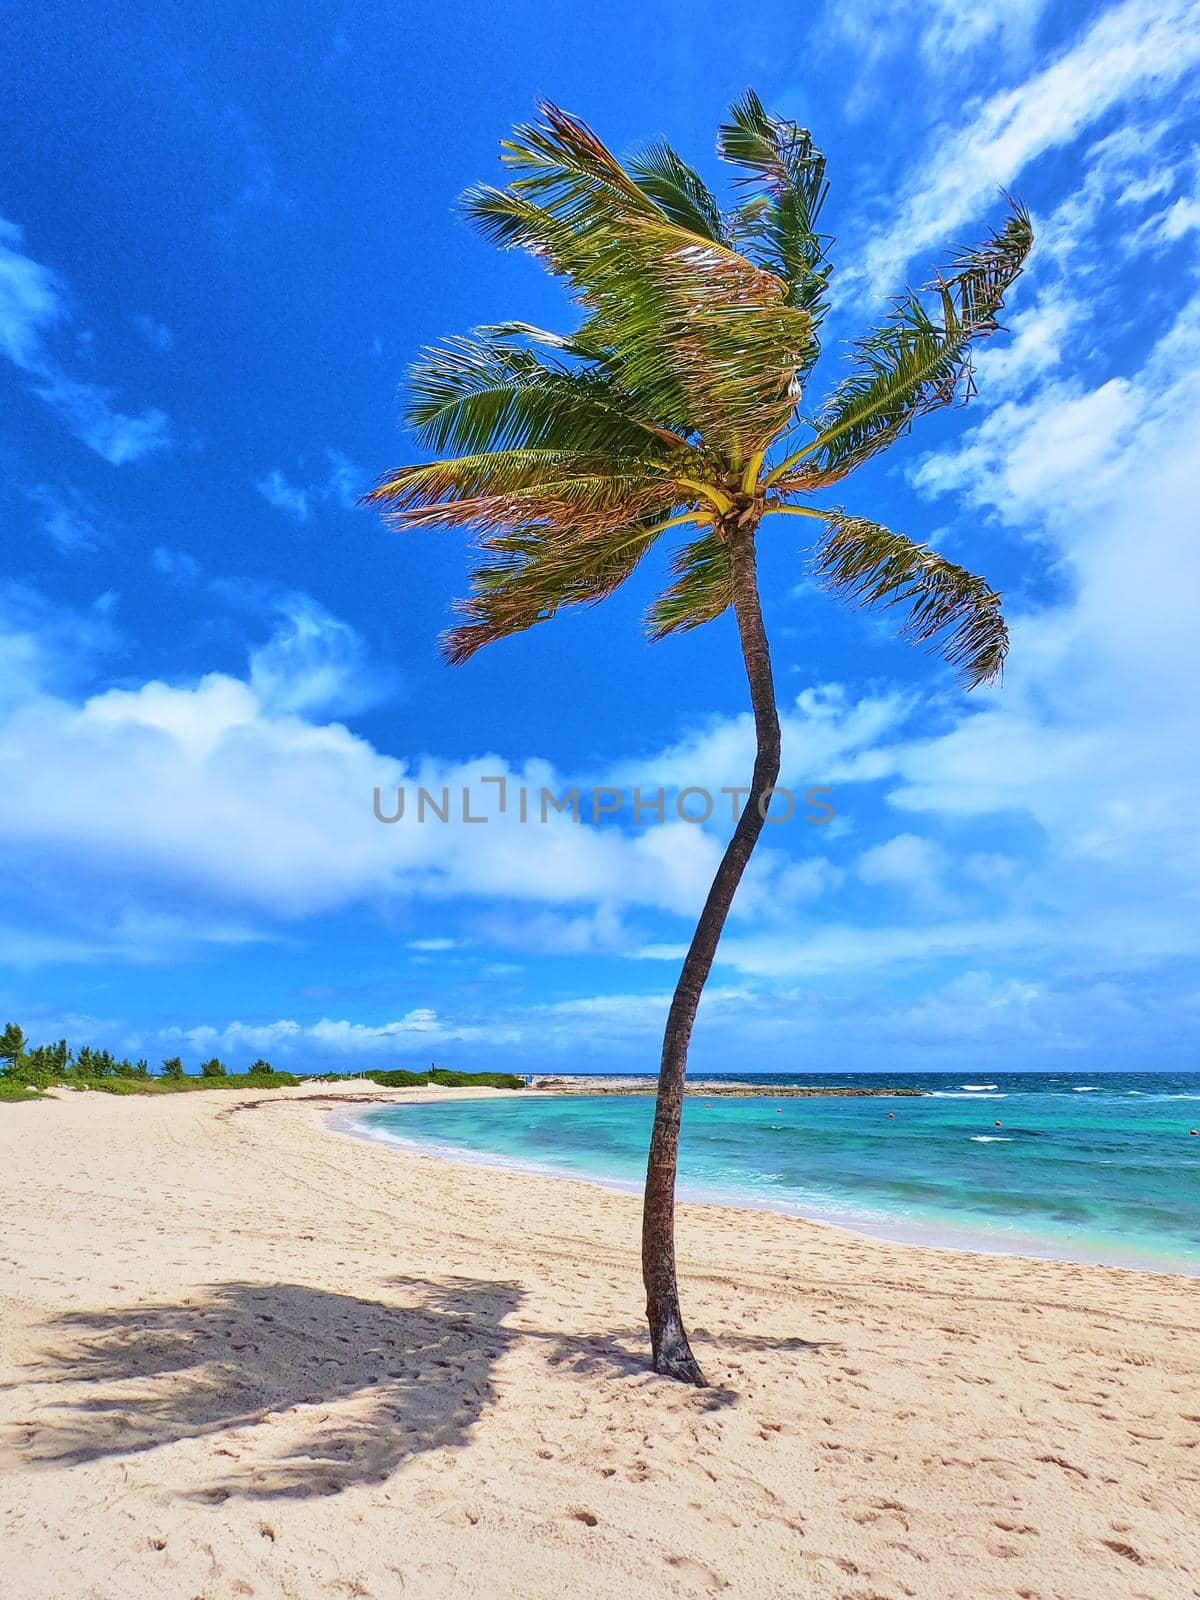 Image of Vertical of single palm tree on sandy white beach against blue tropical ocean and blue sky